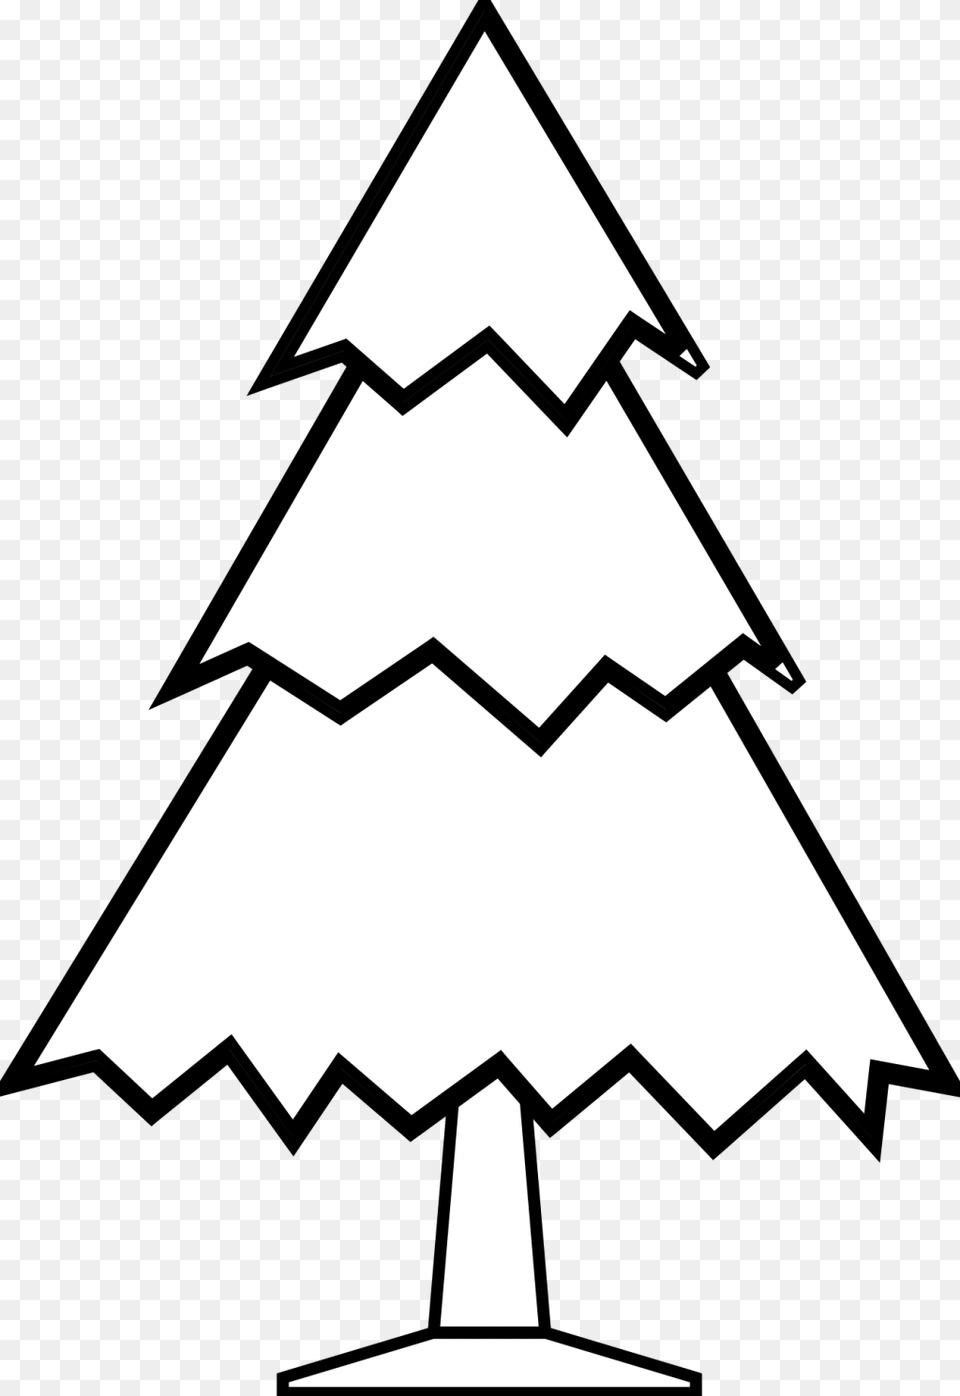 Baby Nursery Charming Black And White Xmas Tree Clipart Kid, Stencil, Triangle Free Transparent Png